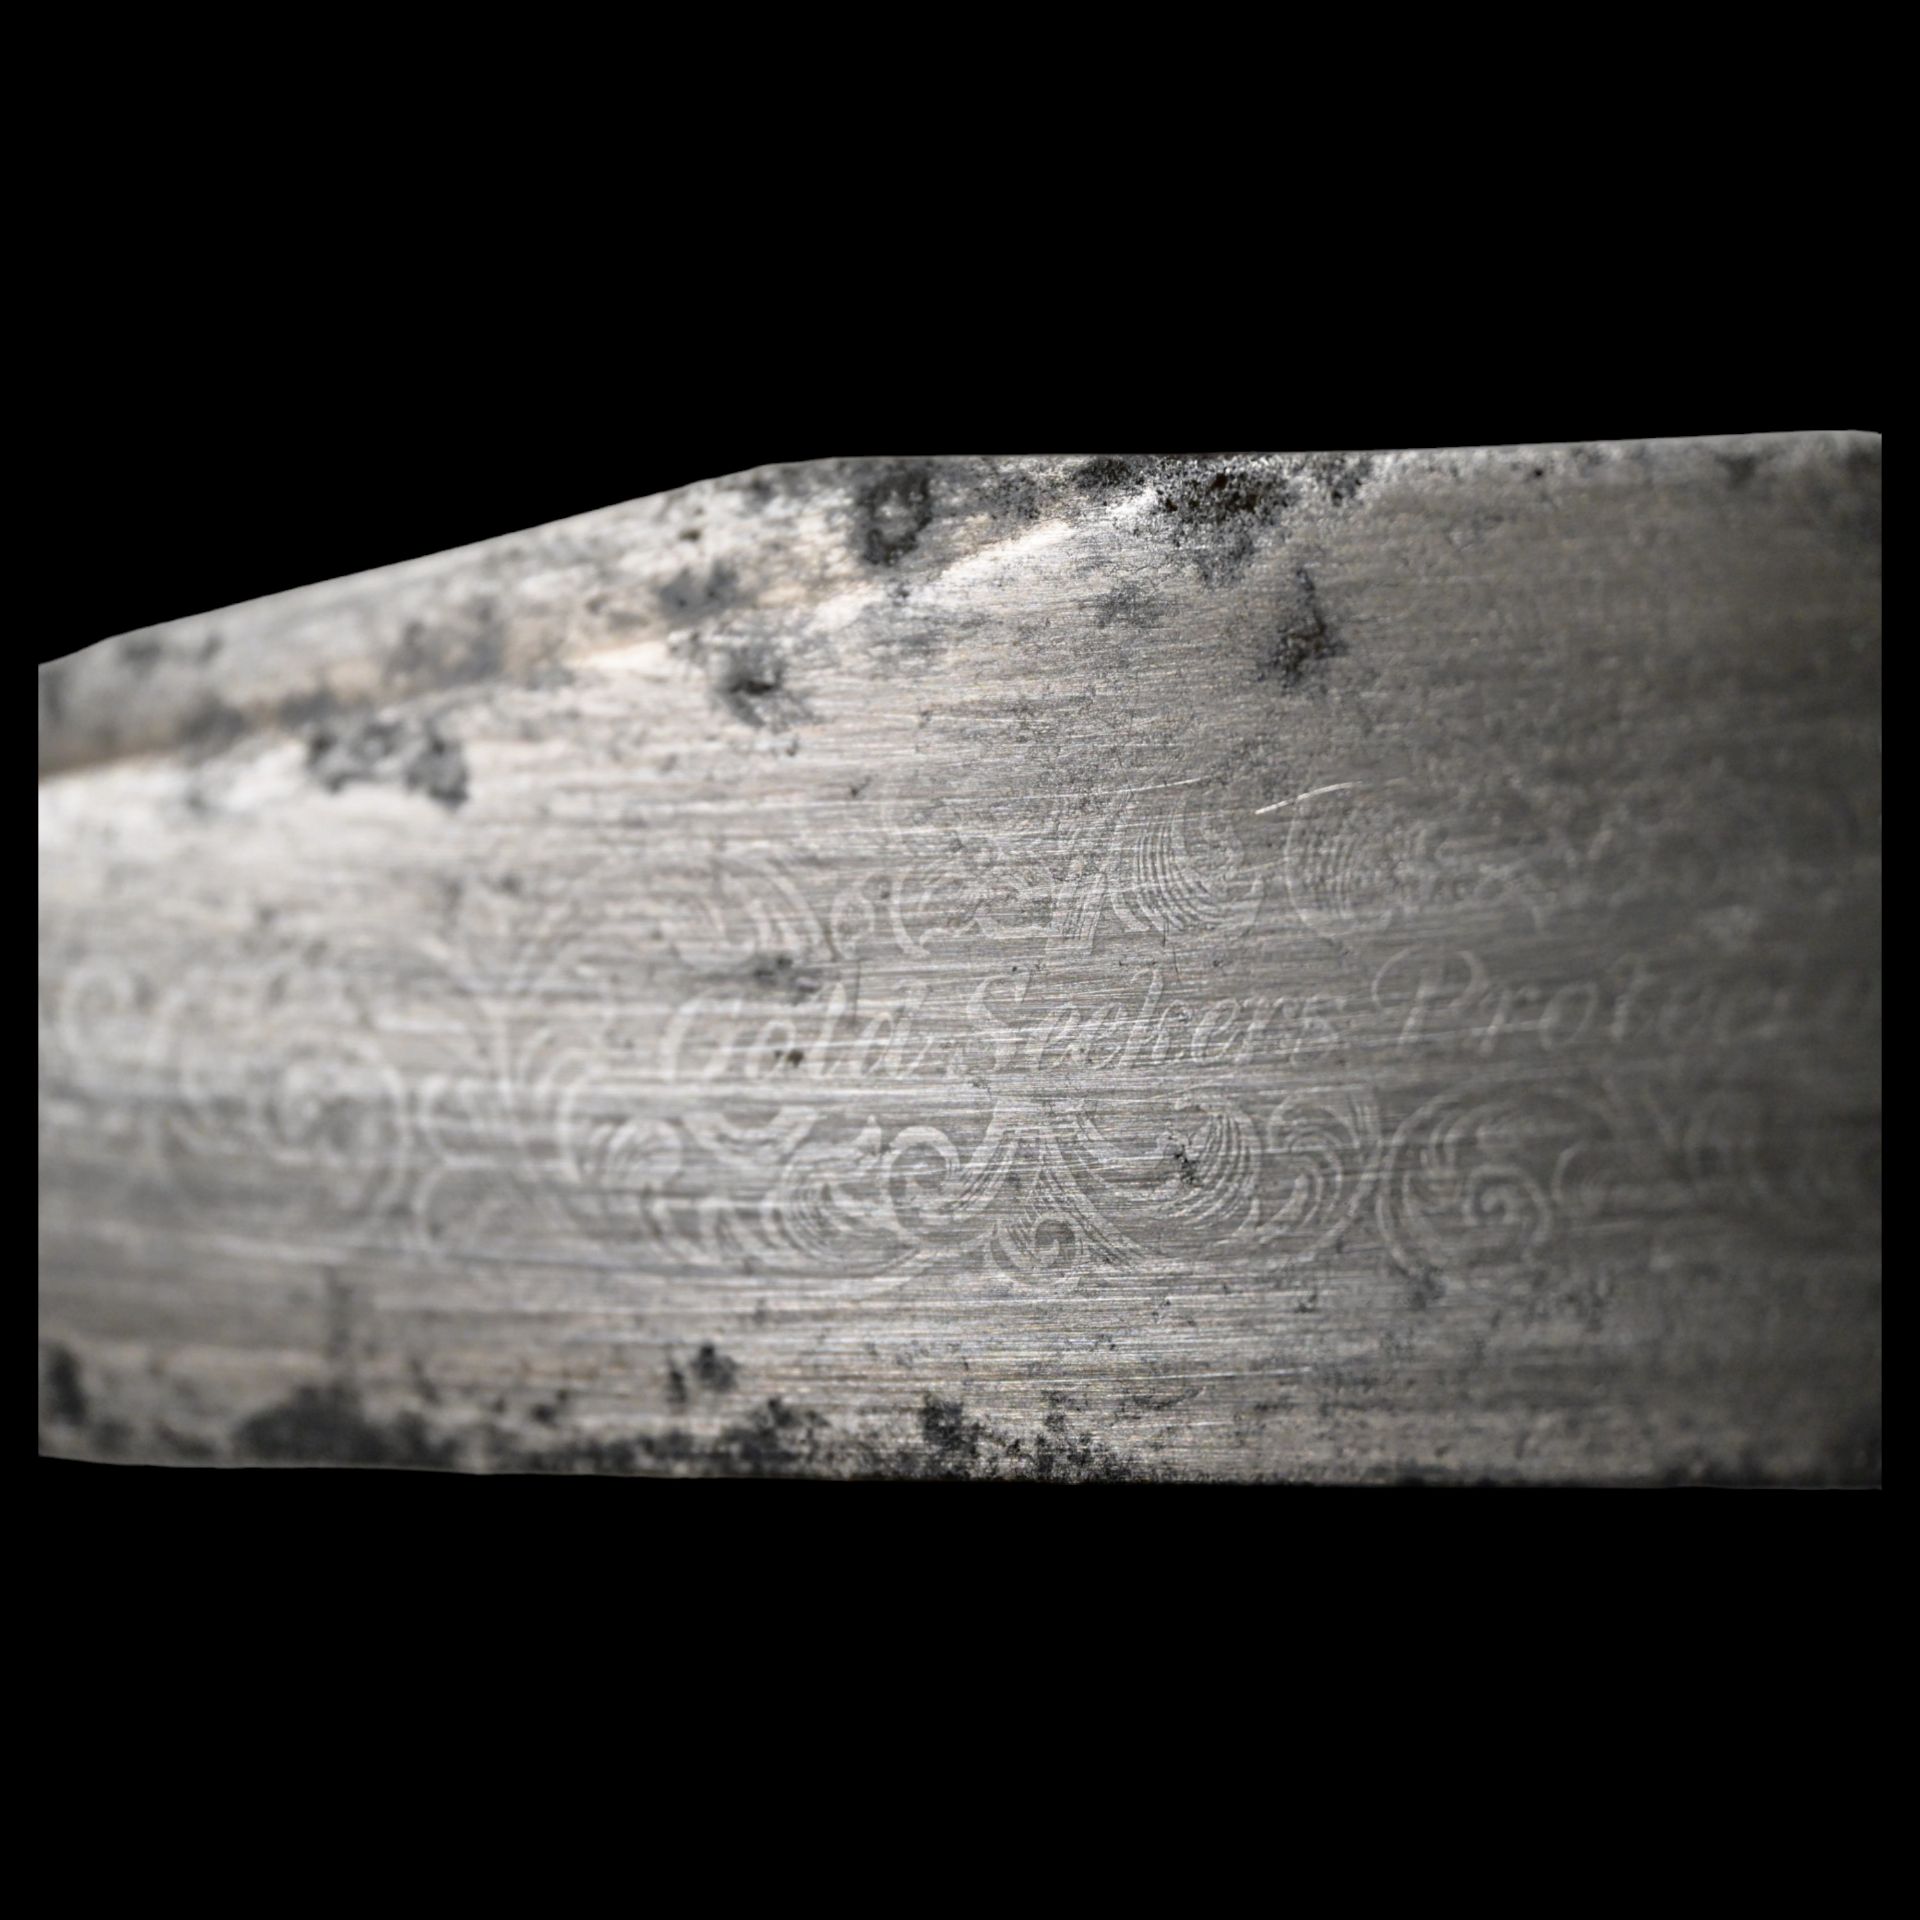 Extra rare and very early Bowie knife of American Gold Miners "Gold Seekers Protector", 1820-30s. - Image 6 of 10